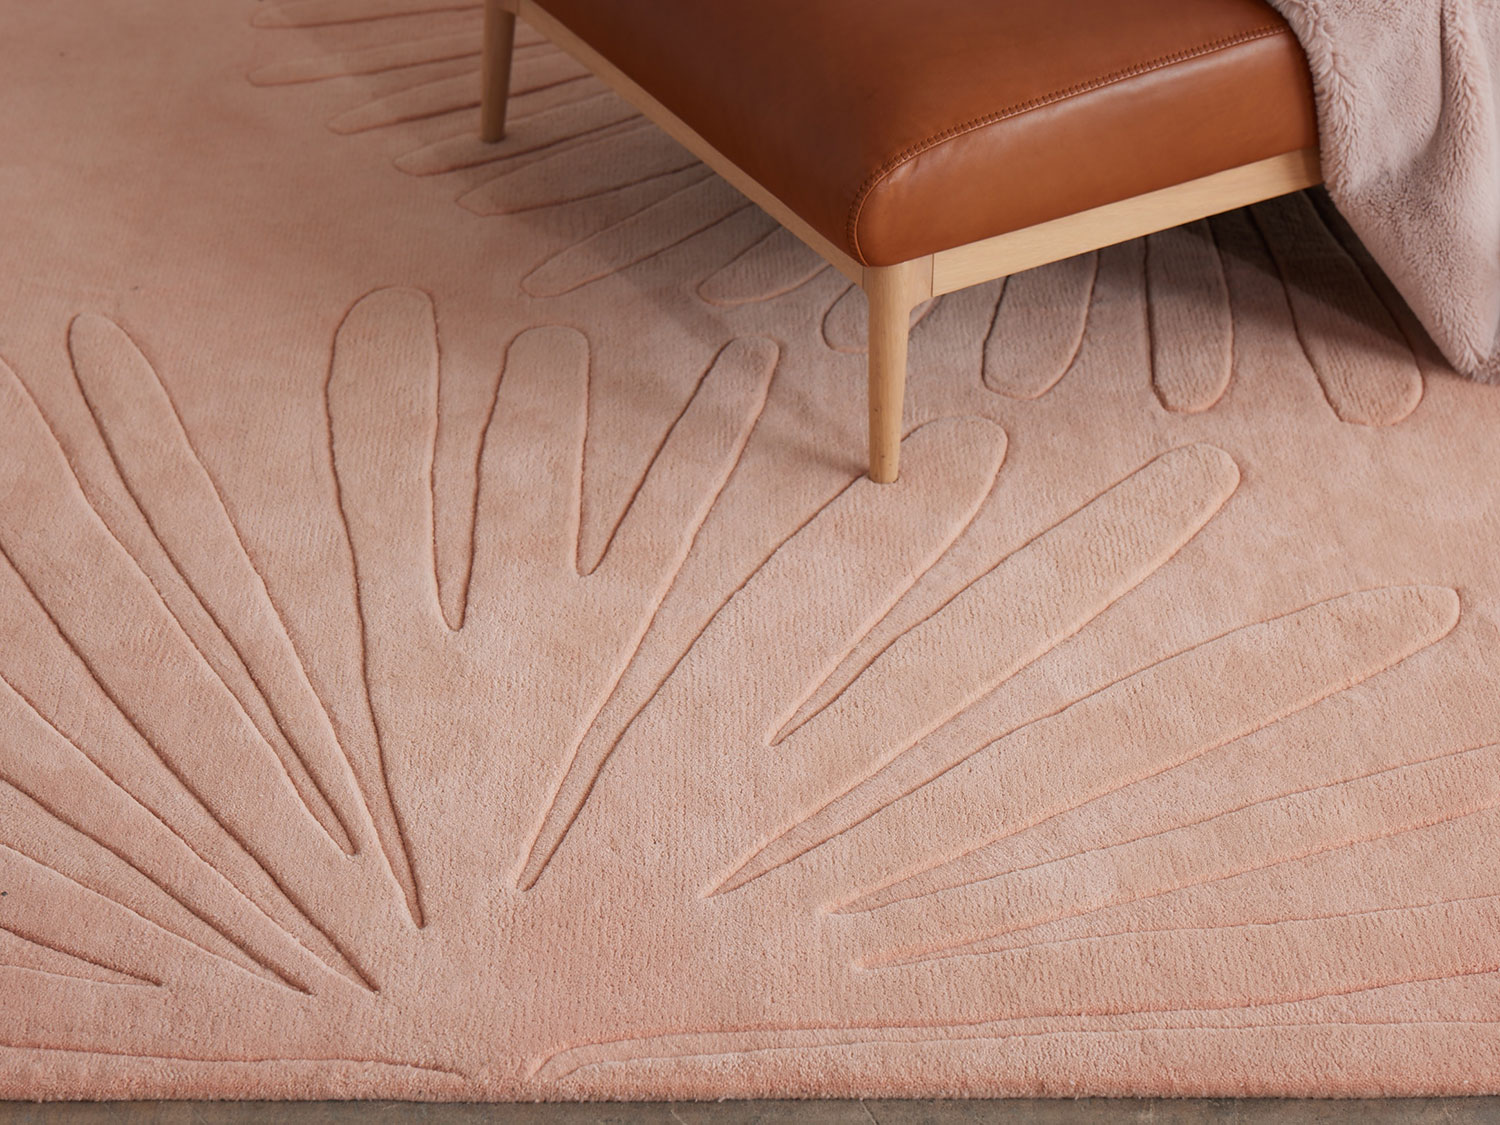 A leather and wood chair sit on a modern area rug in pink called Daisies Petal